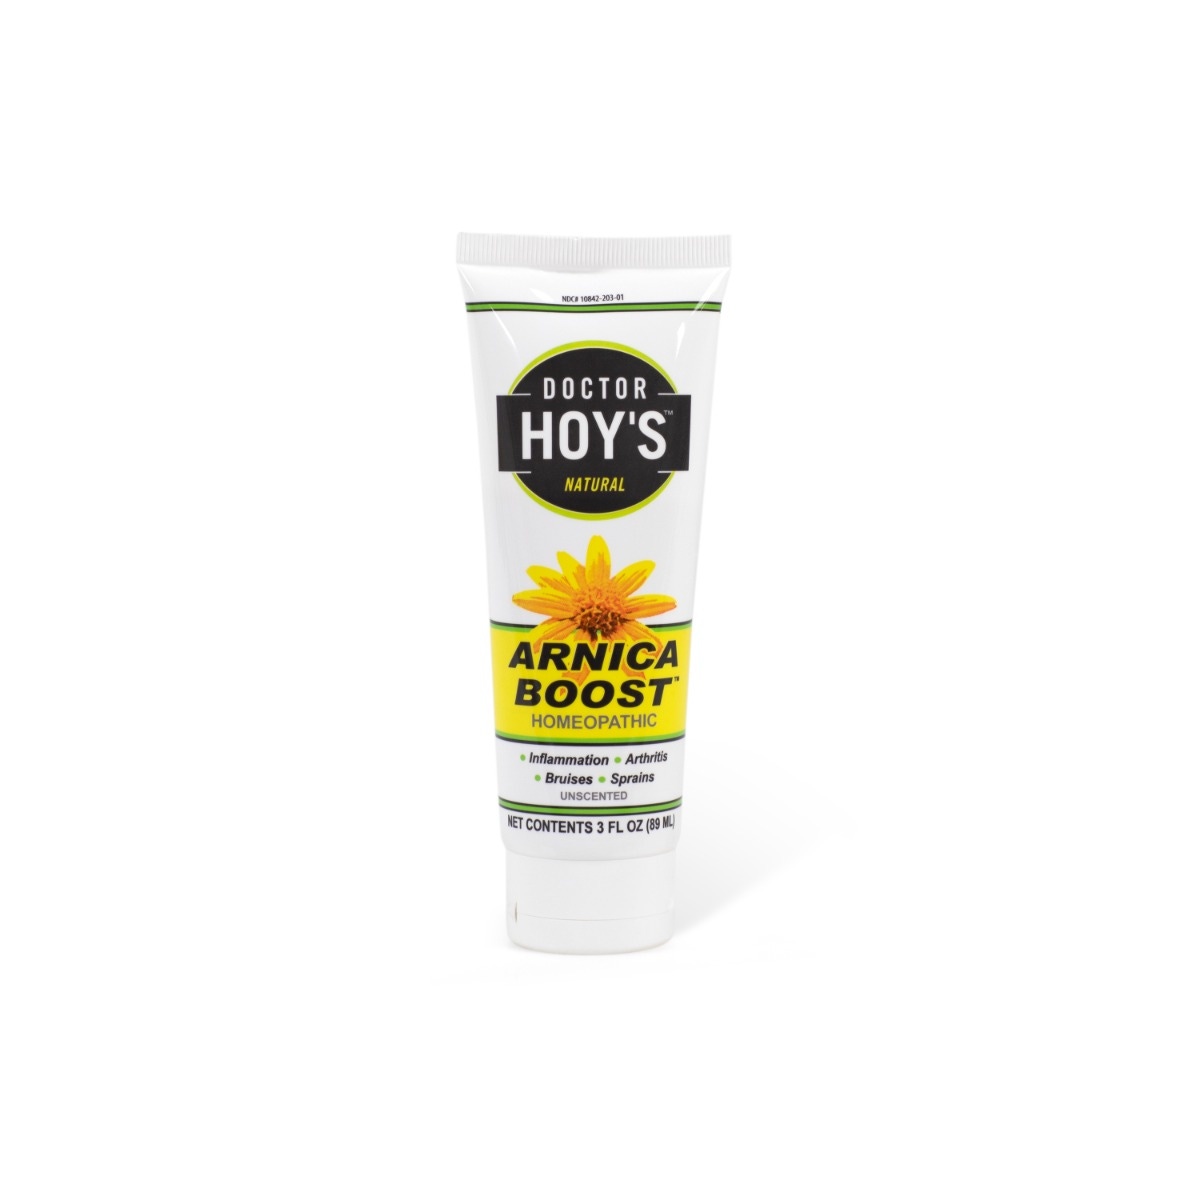 Doctor Hoy’s Arnica Boost Pain Relief